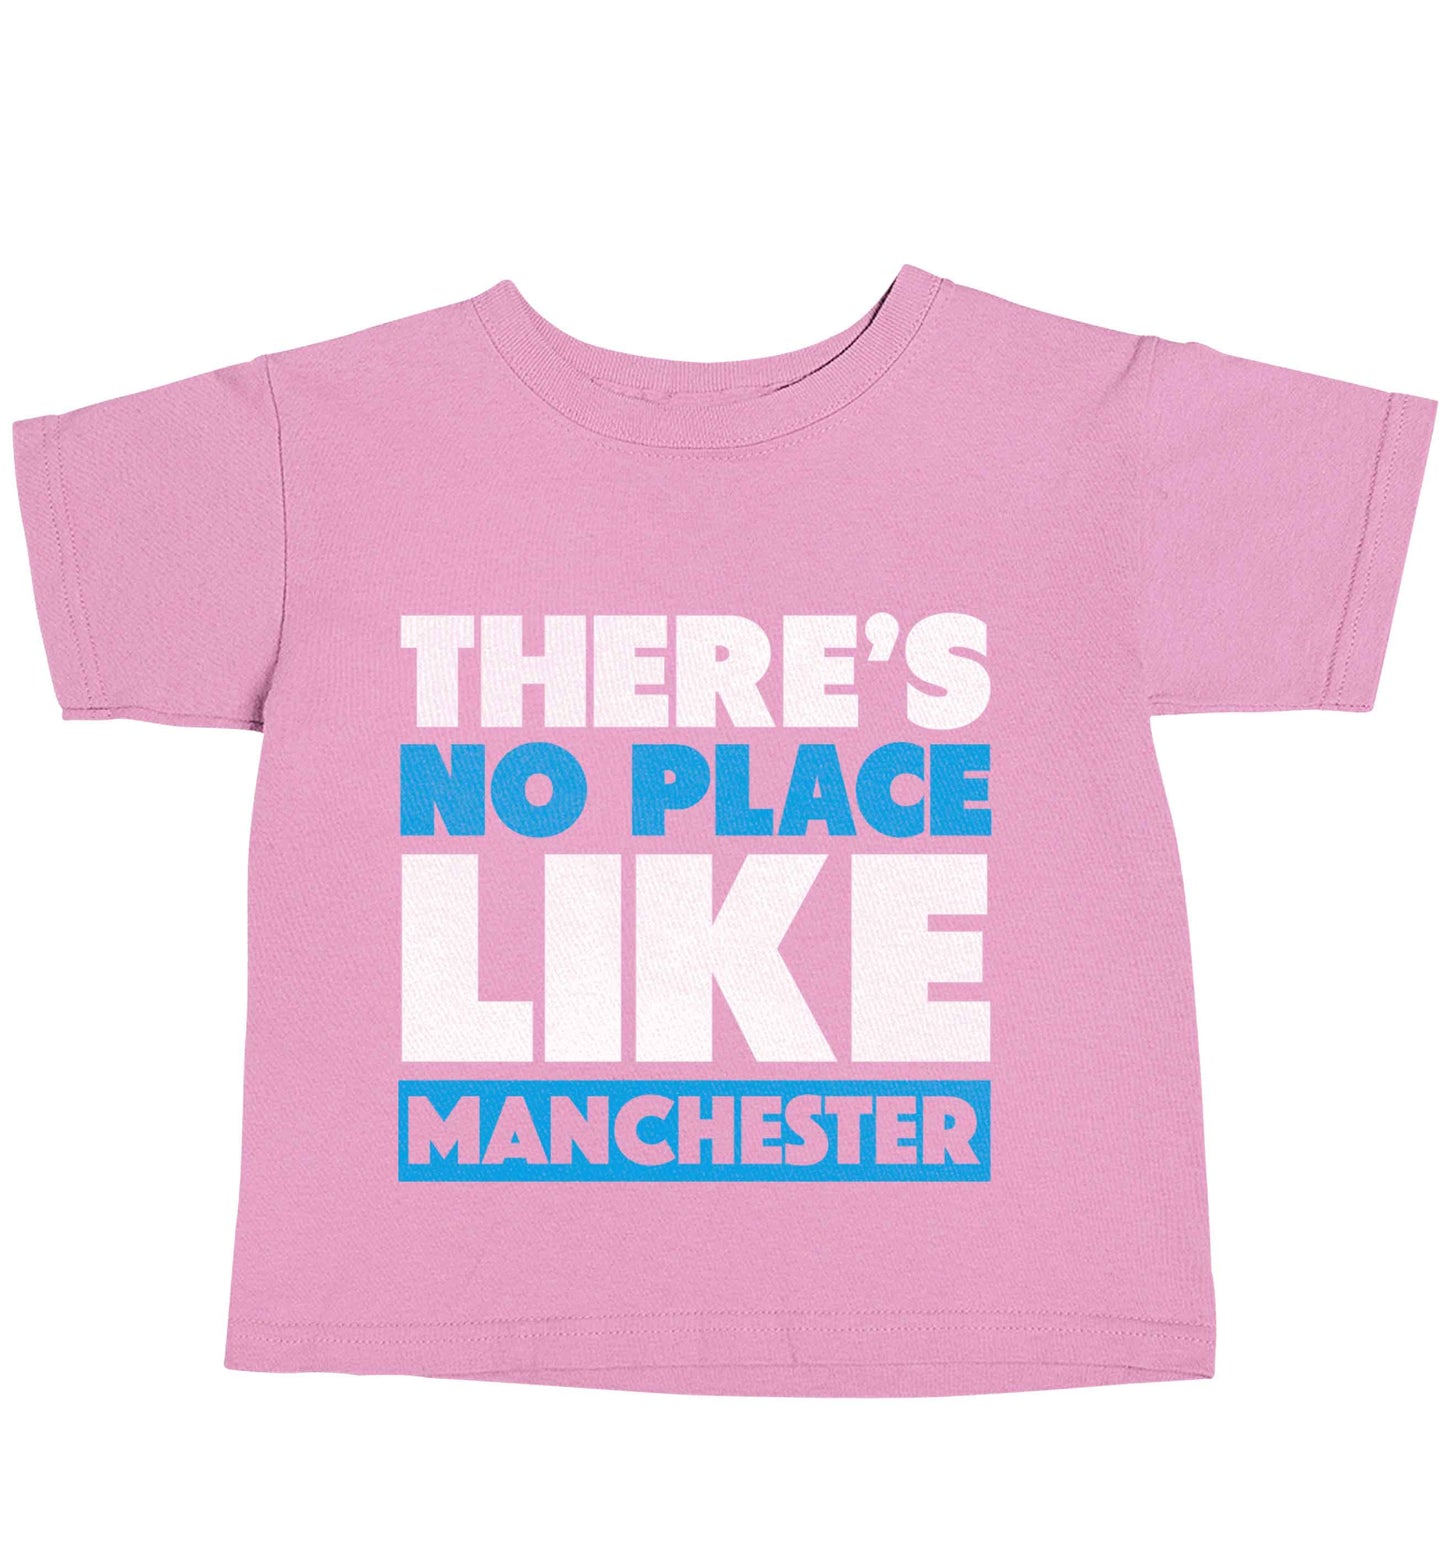 There's no place like Manchester light pink baby toddler Tshirt 2 Years